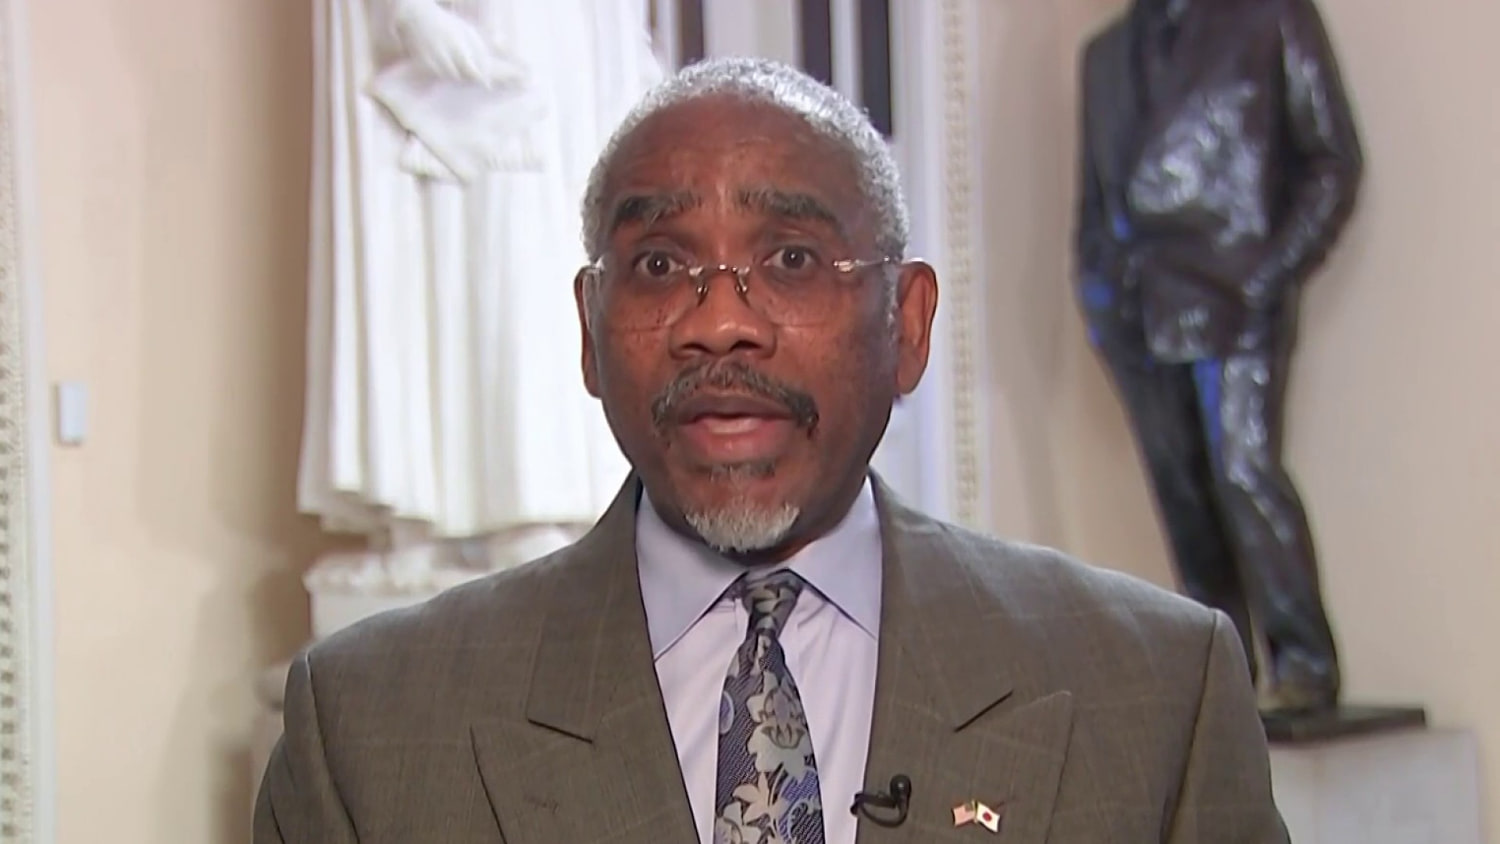 Rep. Meeks wants ‘assurances’ on Israel aid but is open to sending weapons if Iran retaliates